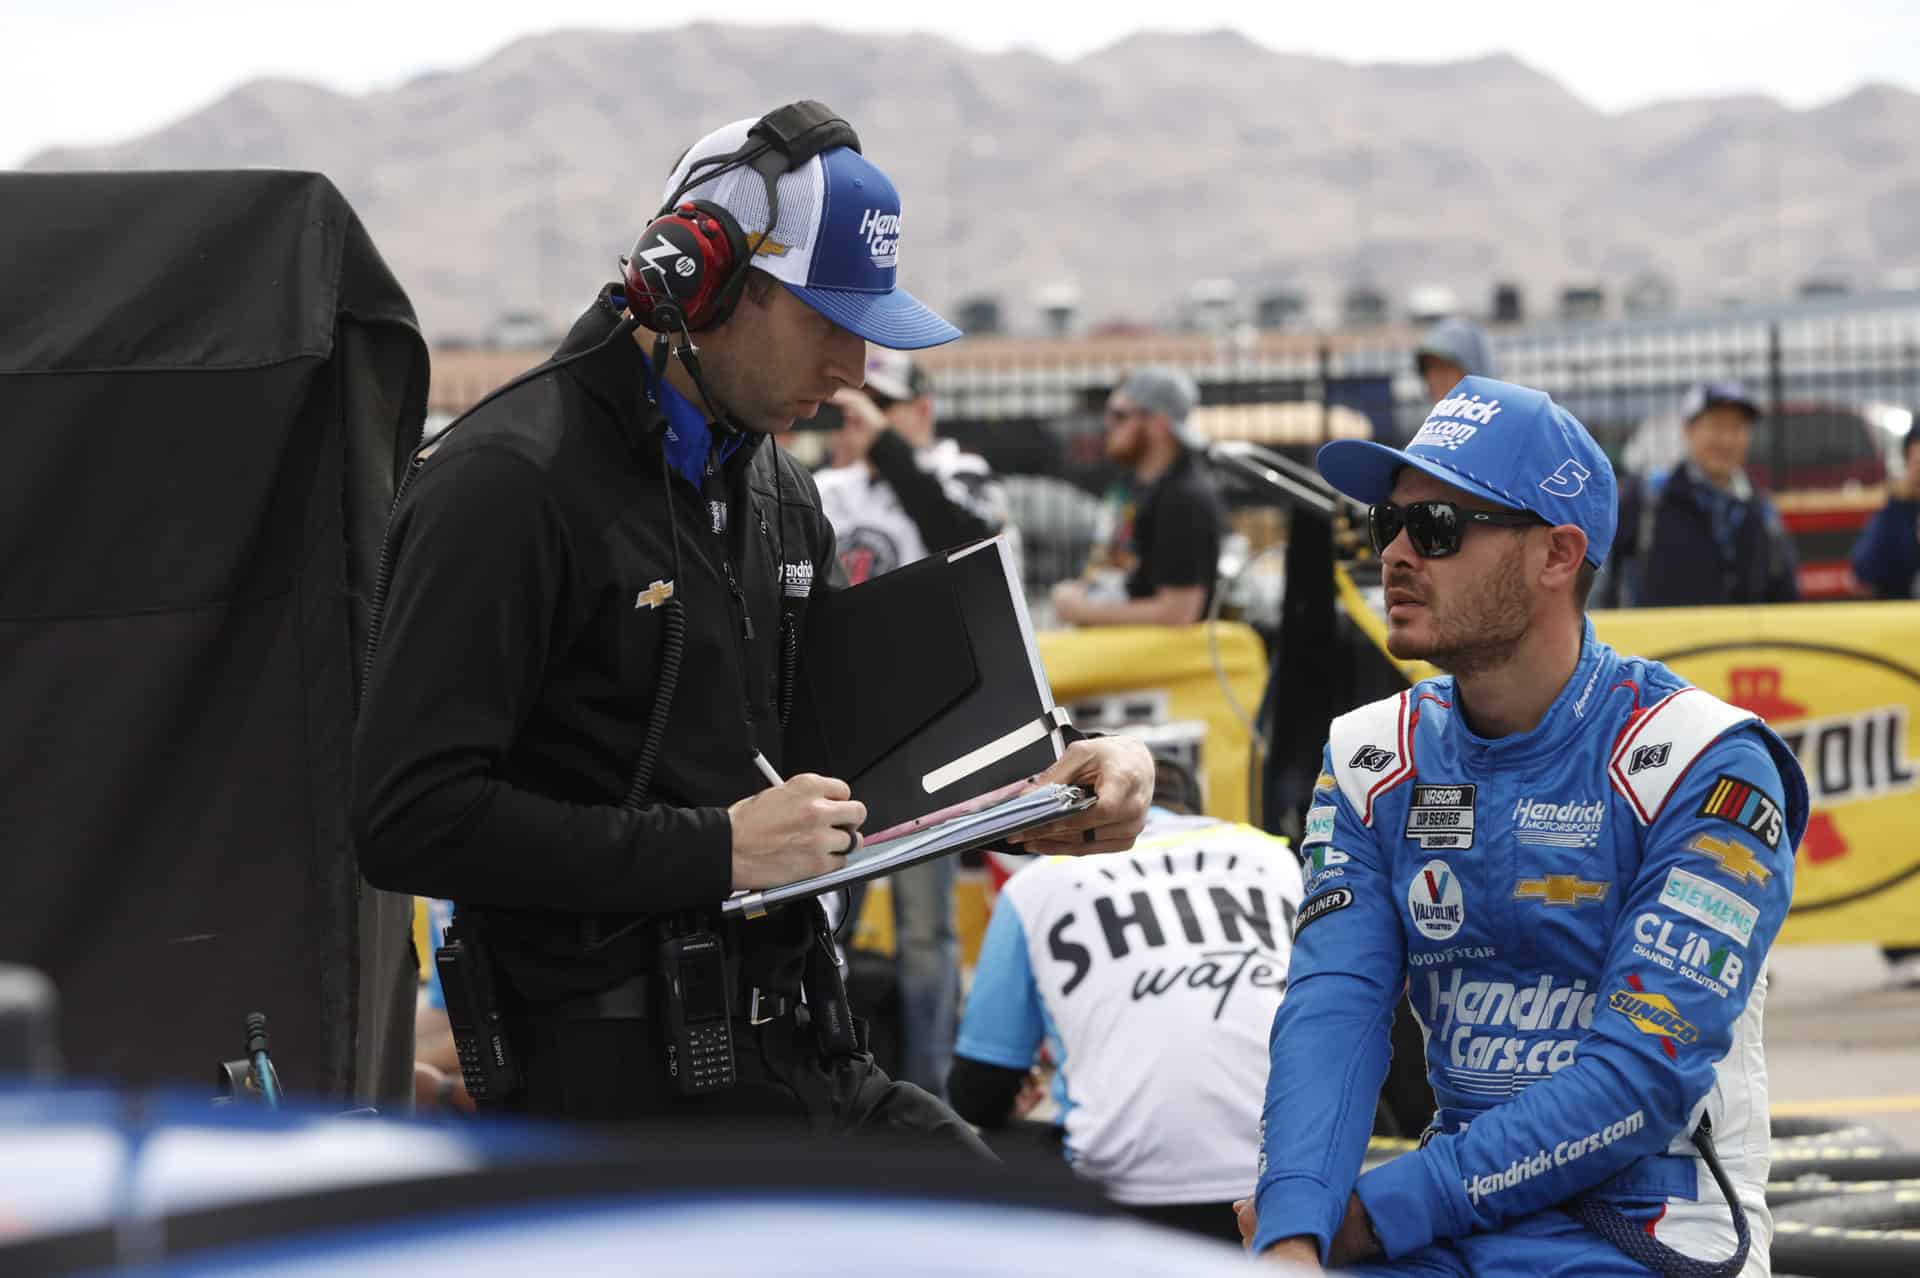 Kyle Larson and crew chief Cliff Daniels debrief together during the NASCAR Cup Series visit to Las Vegas Motor Speedway. Photo by Nigel Kinrade Photography.